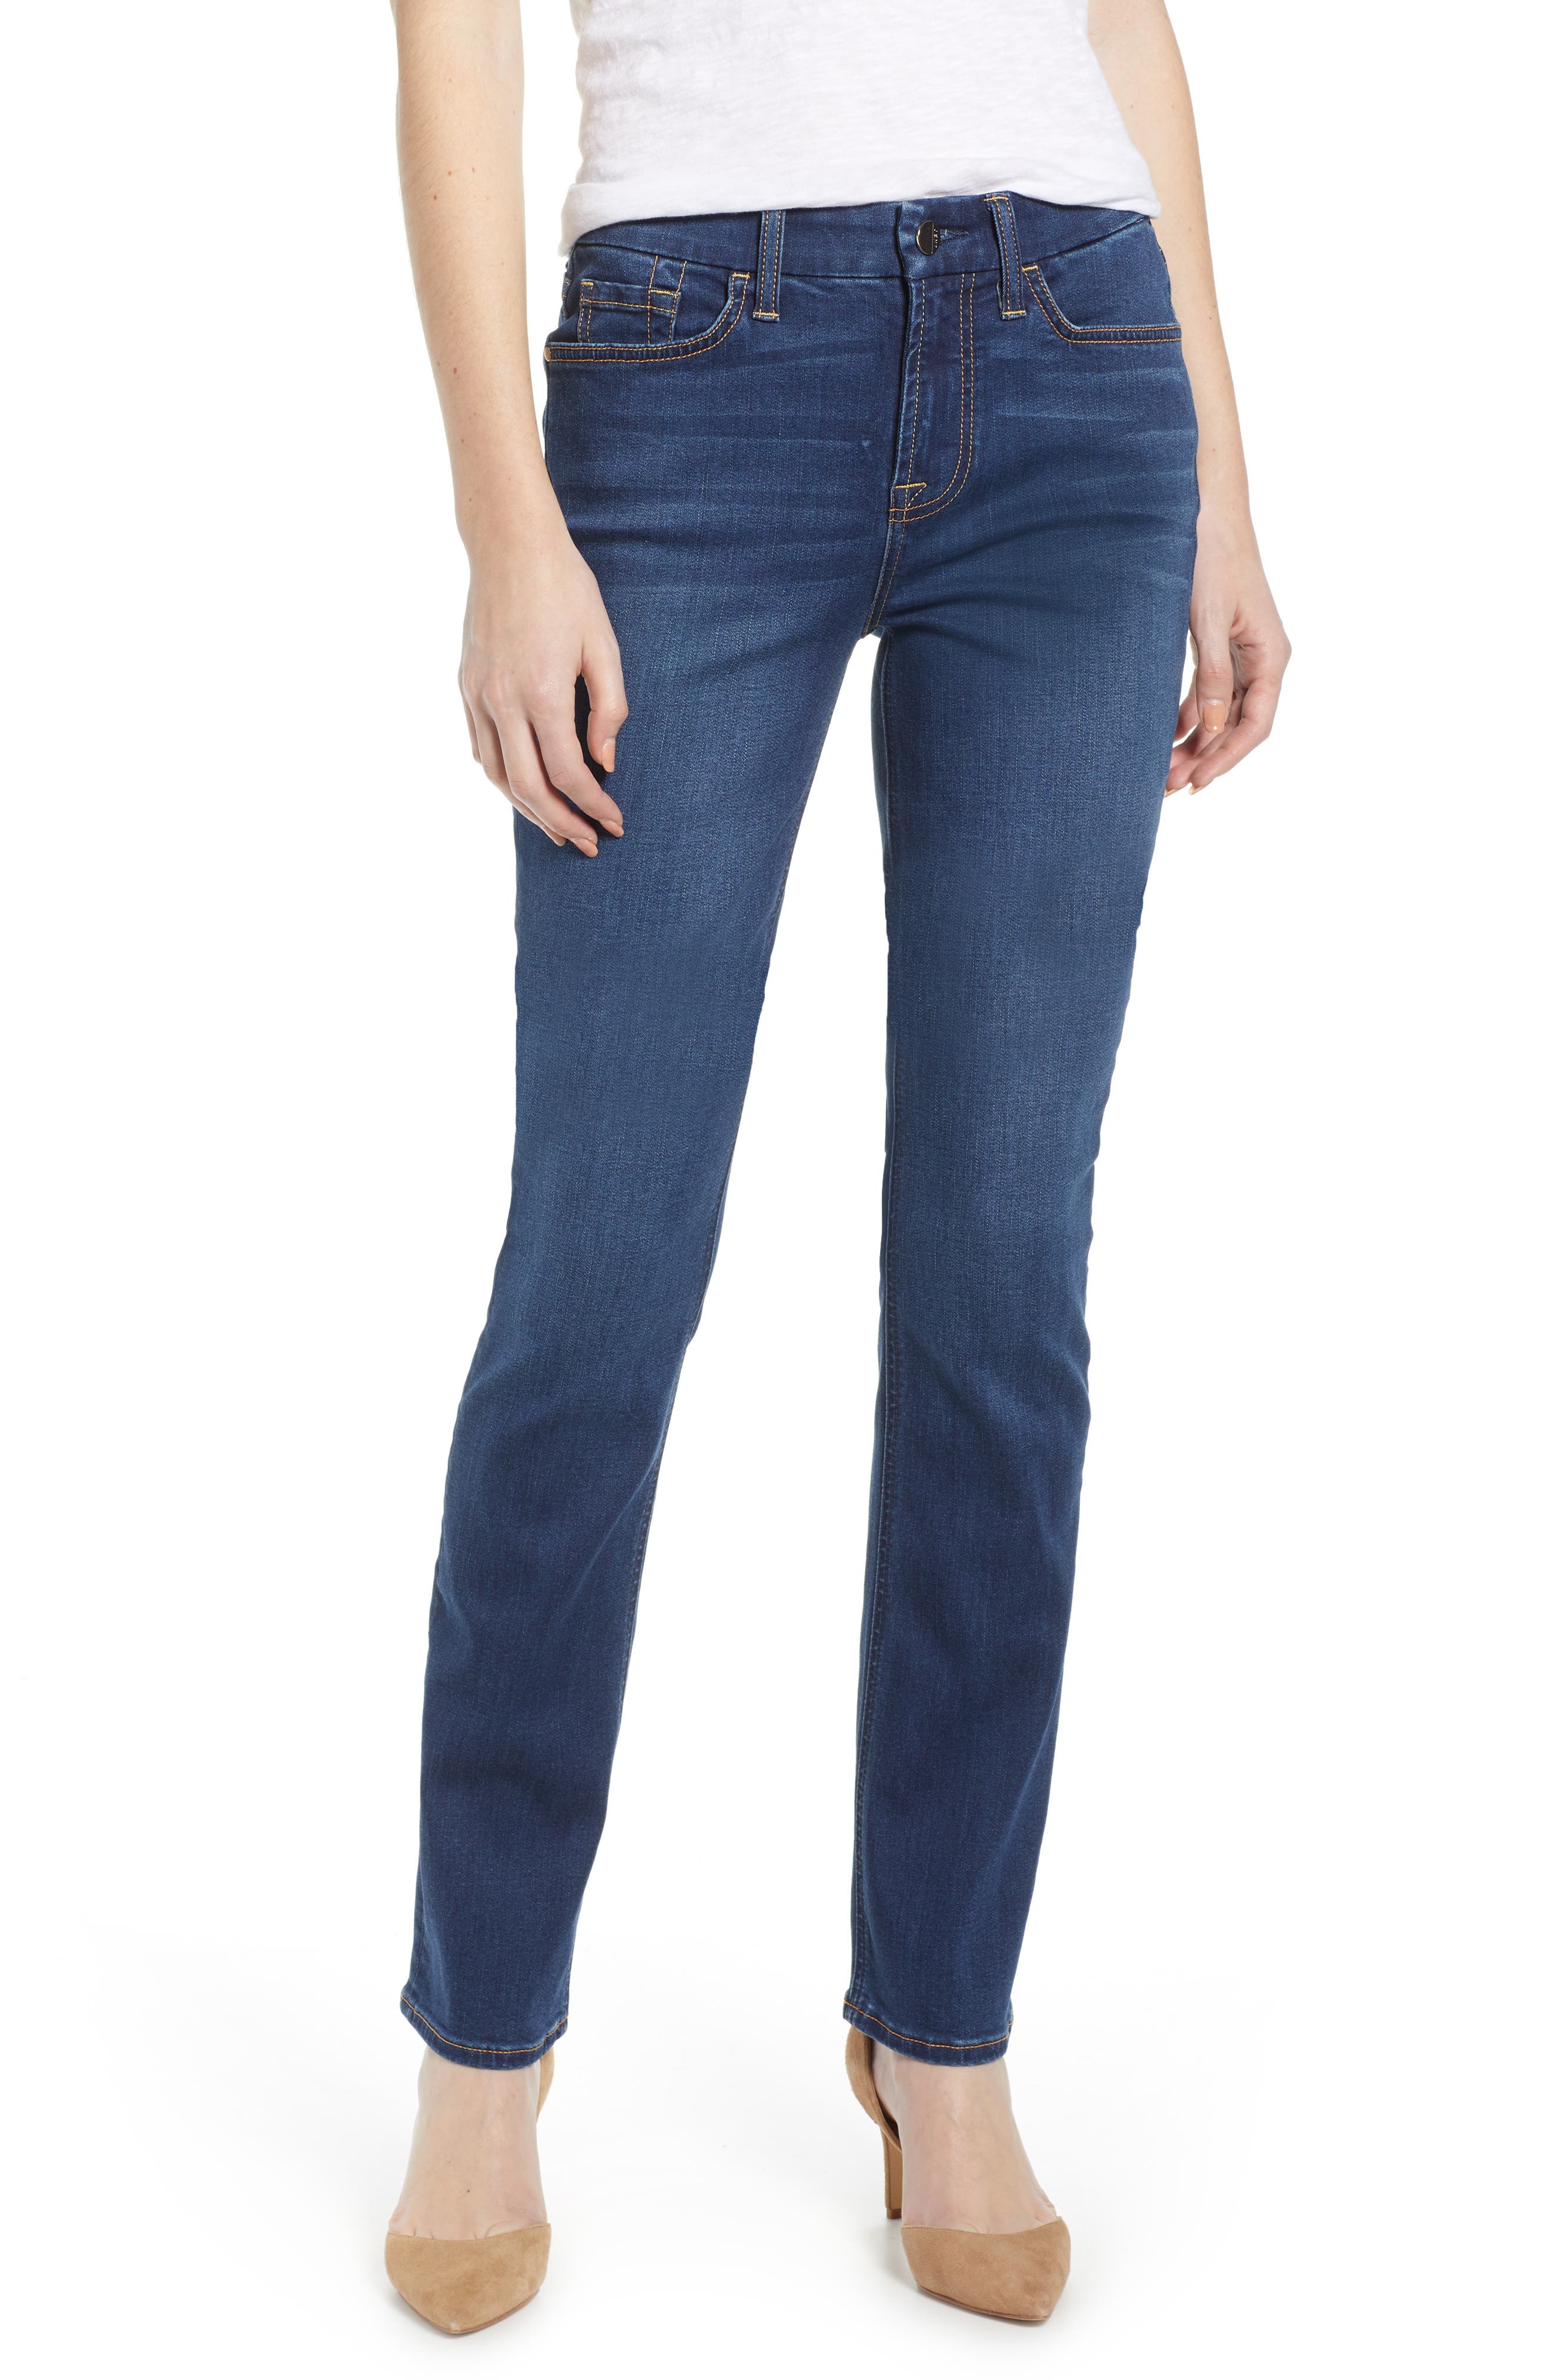 7 for all mankind slim straight